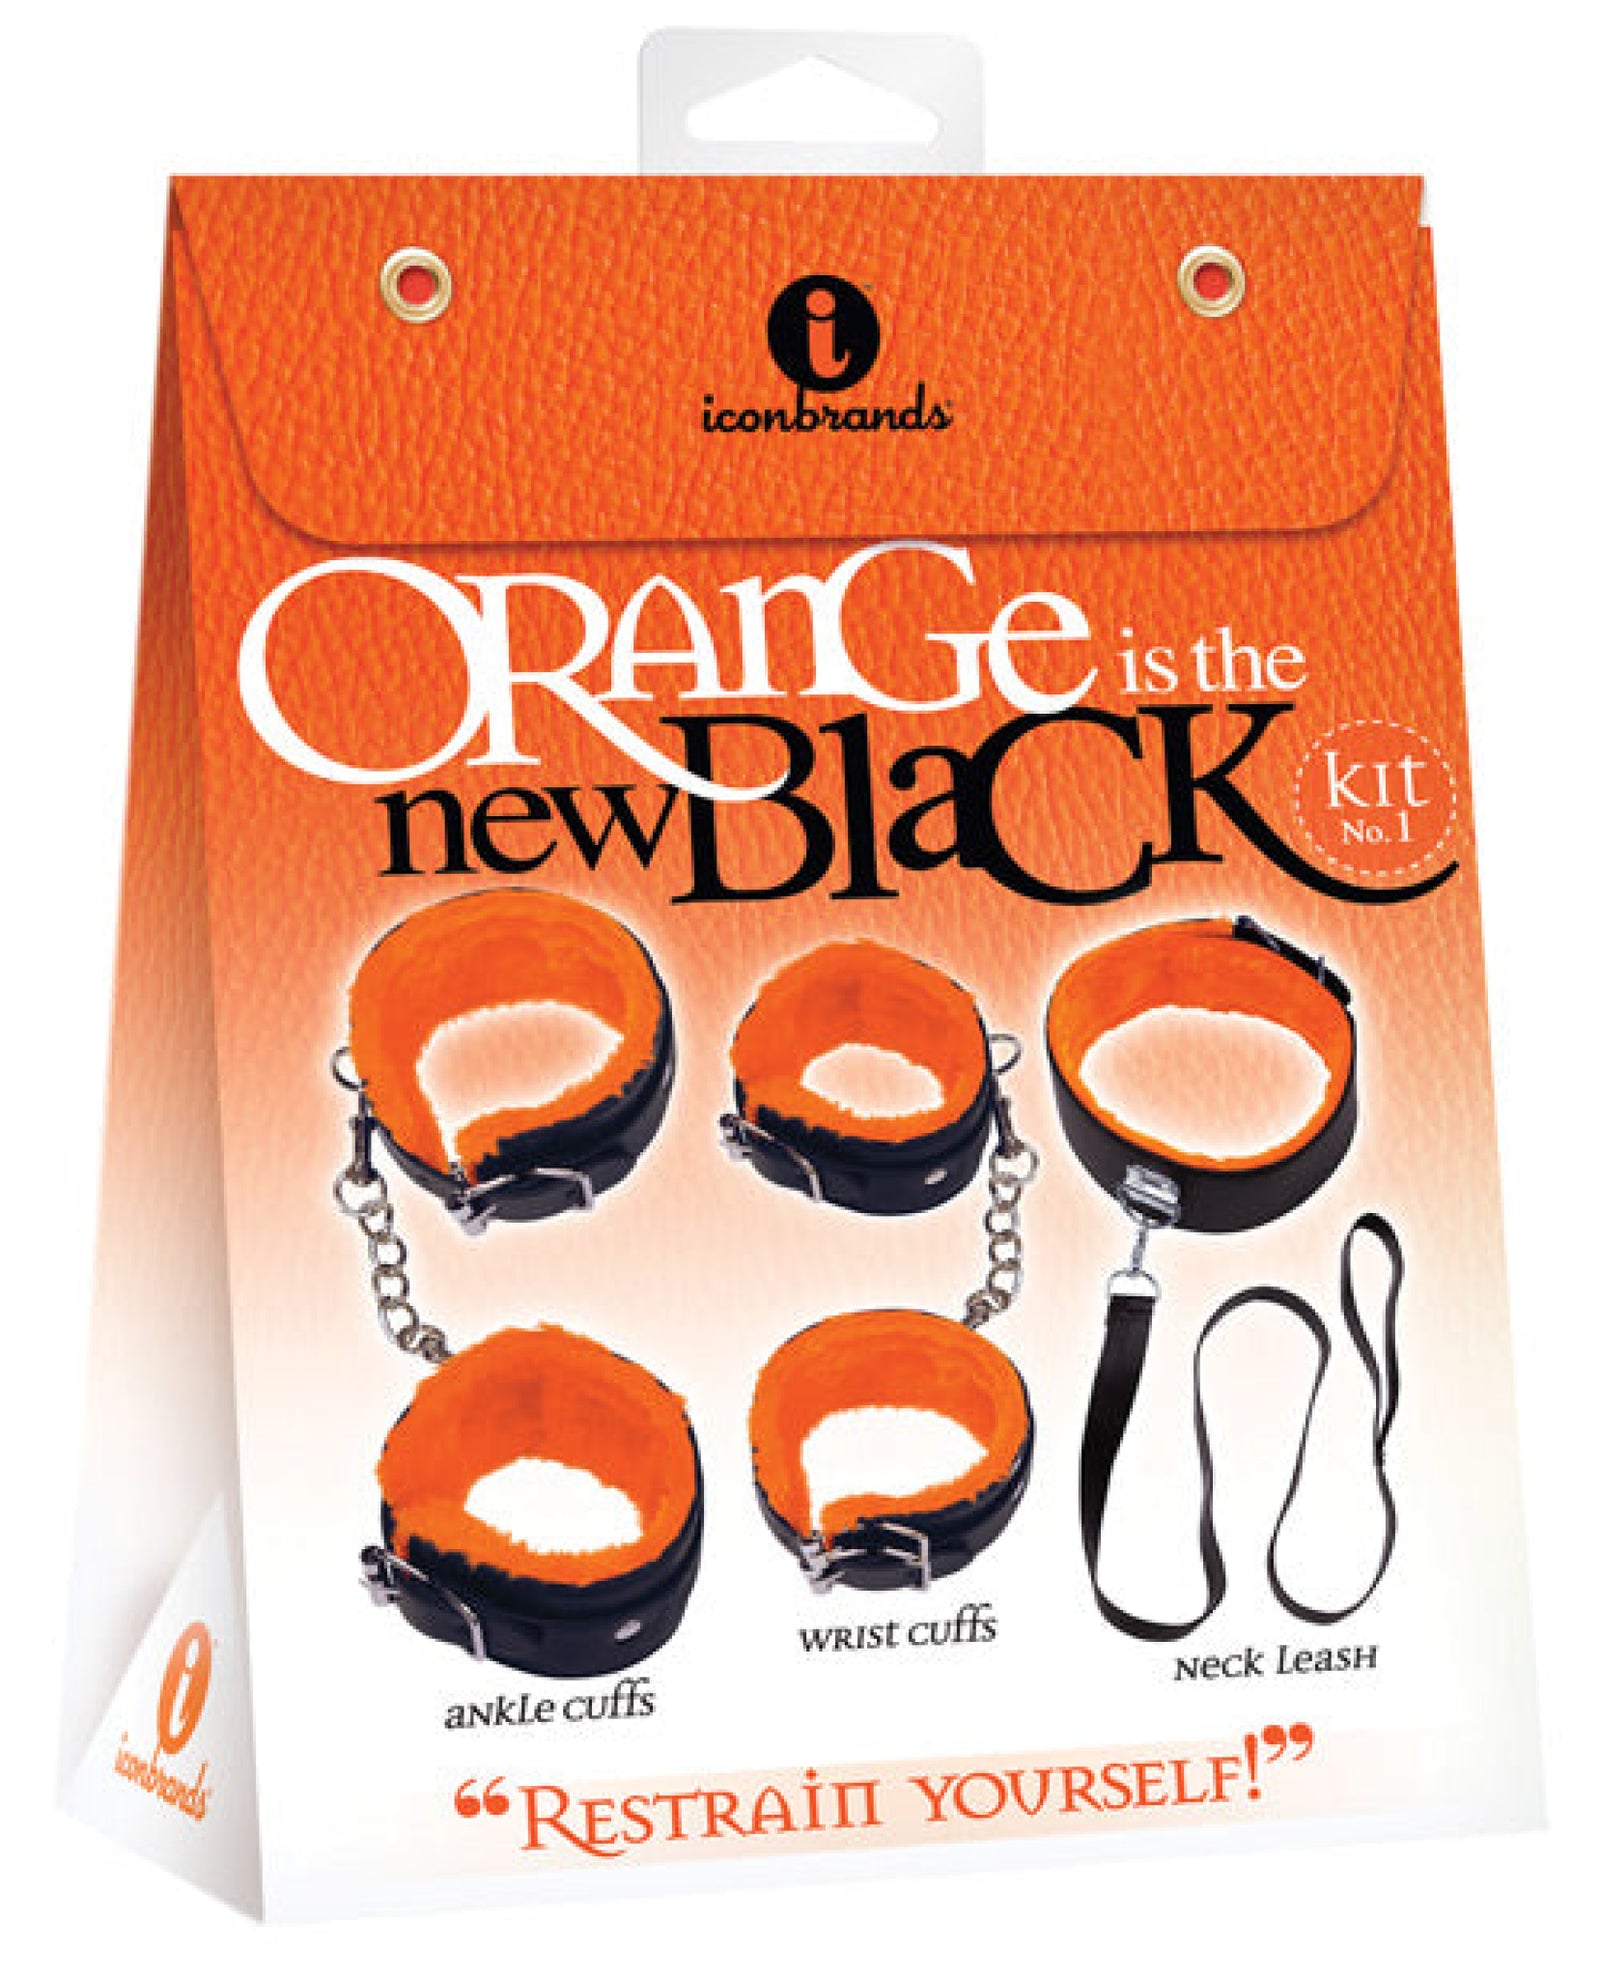 The 9's Orange Is The New Black Kit #1 - Restrain Yourself Icon